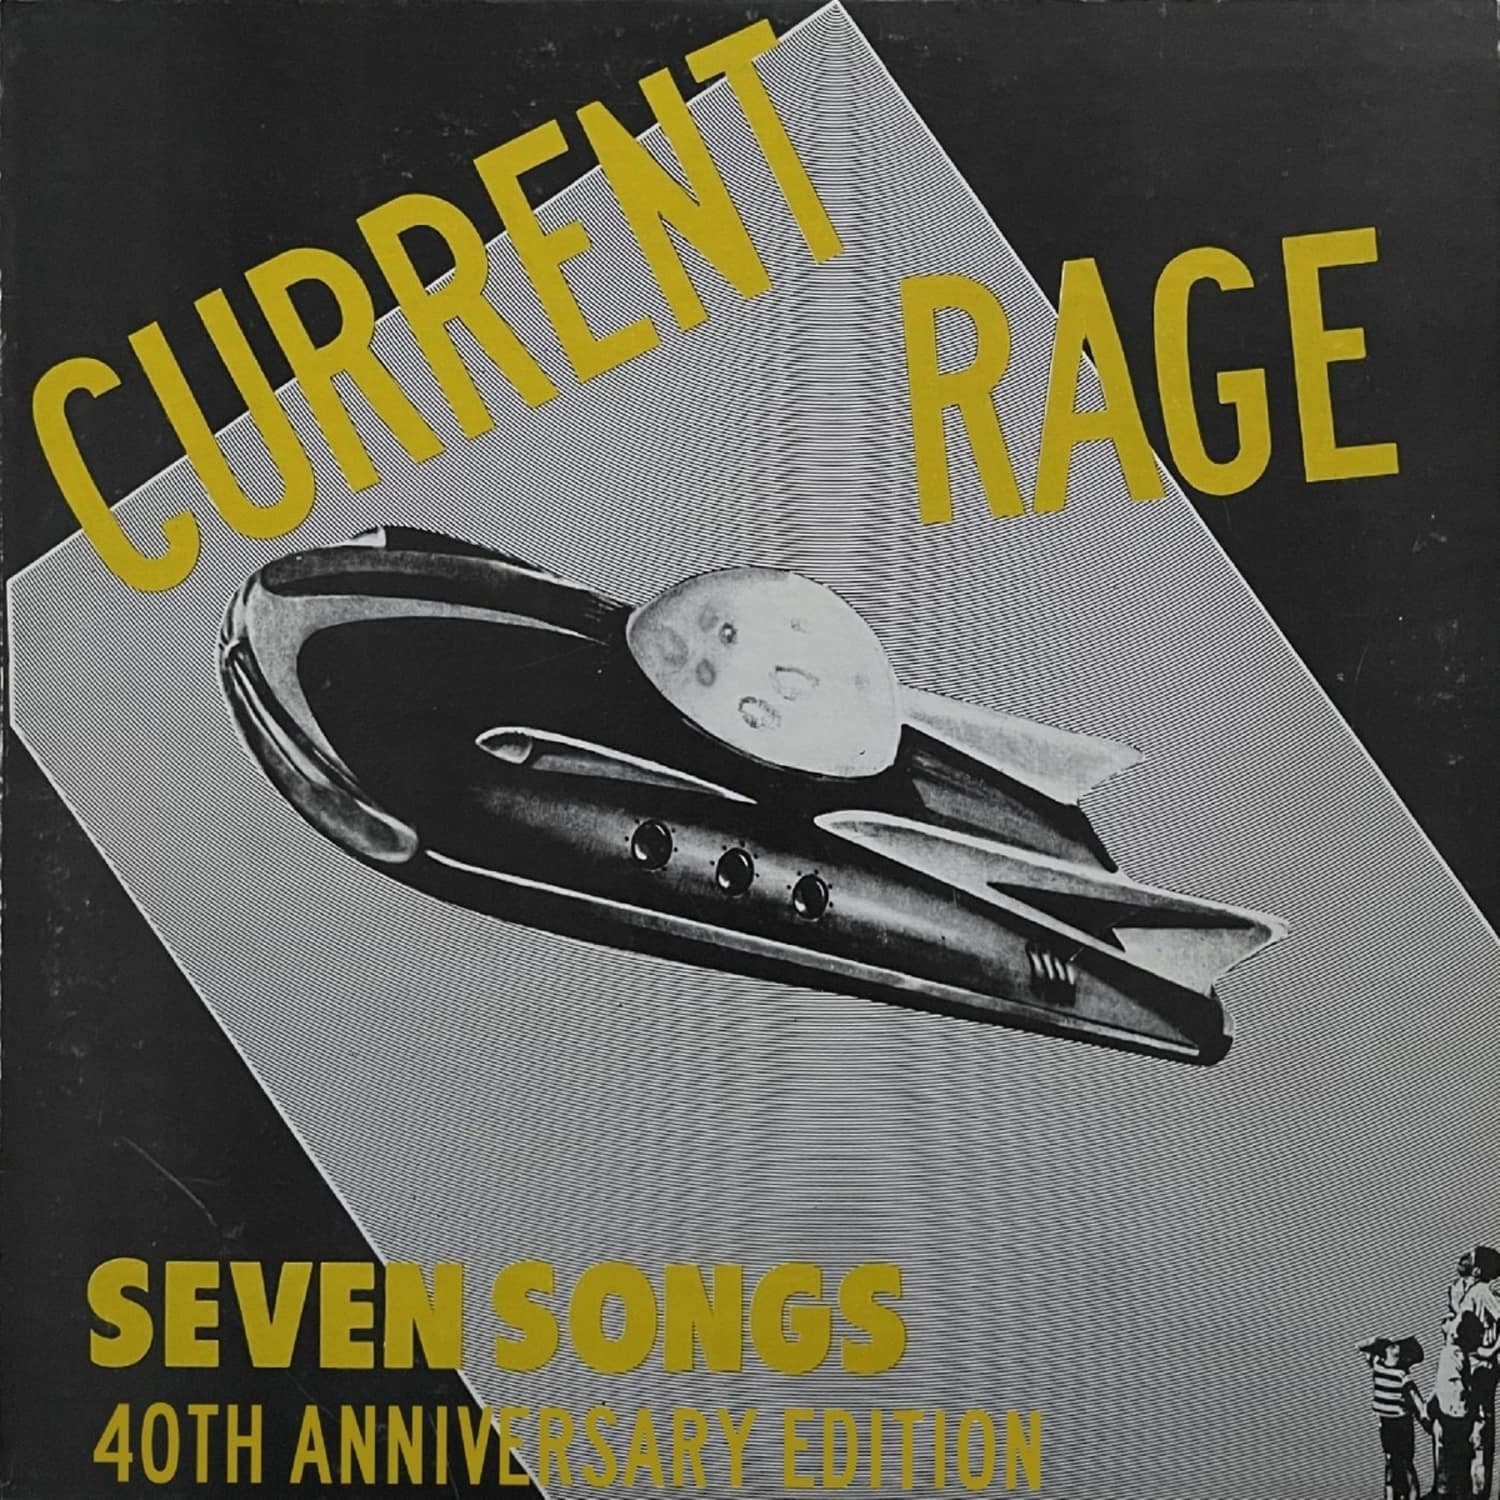 Current Rage - SEVEN SONGS 